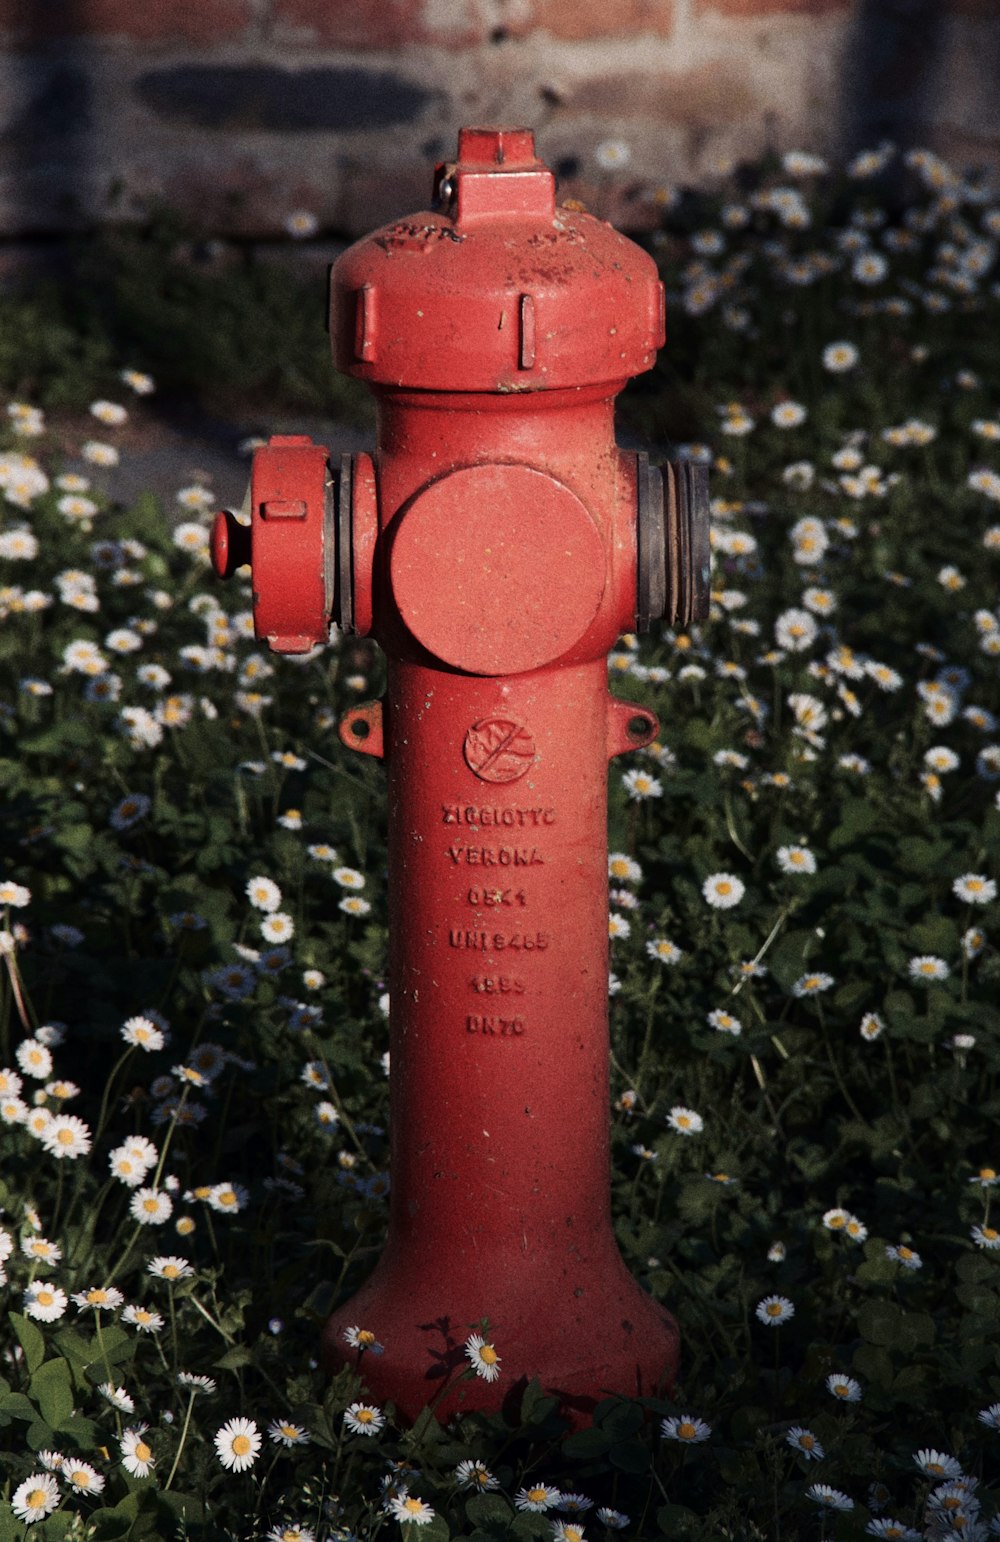 a red fire hydrant sitting in a field of daisies